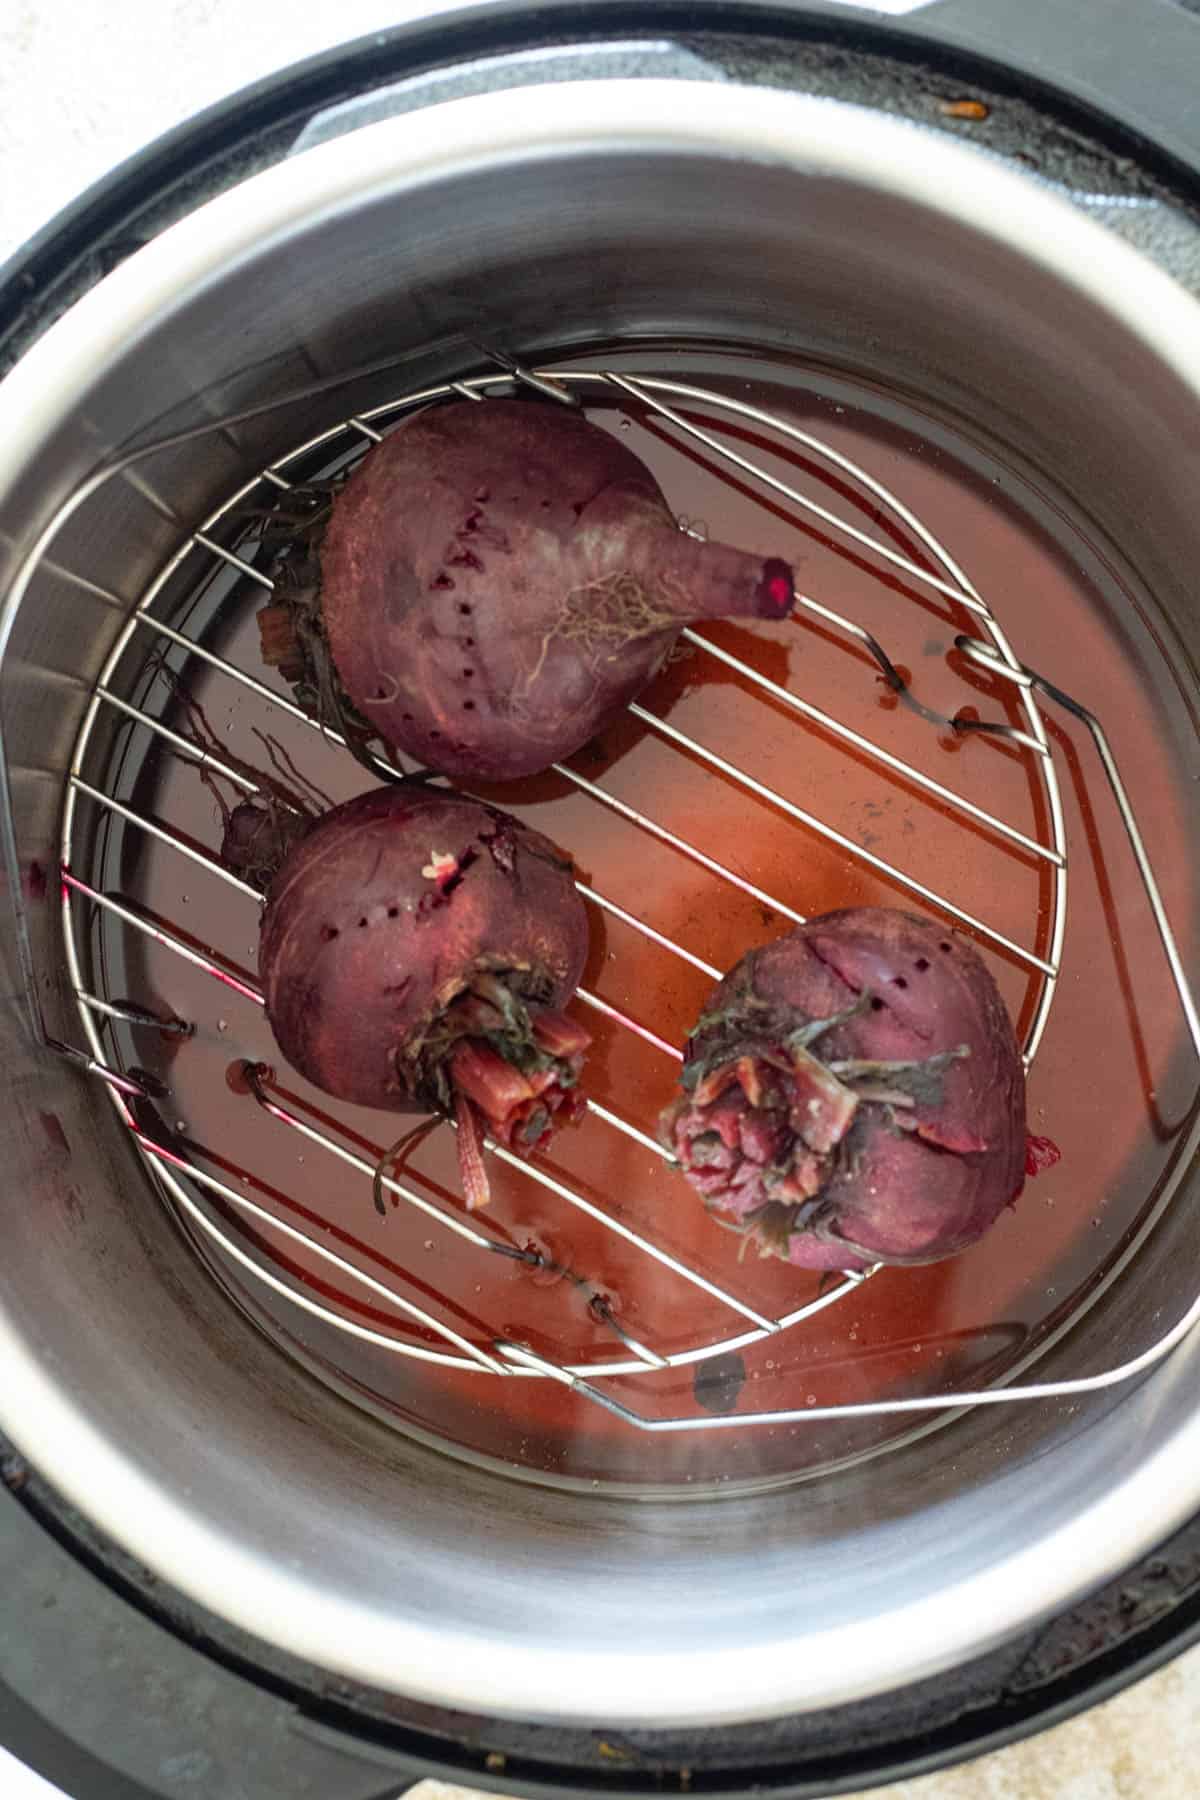 Cooked beets in the instant pot